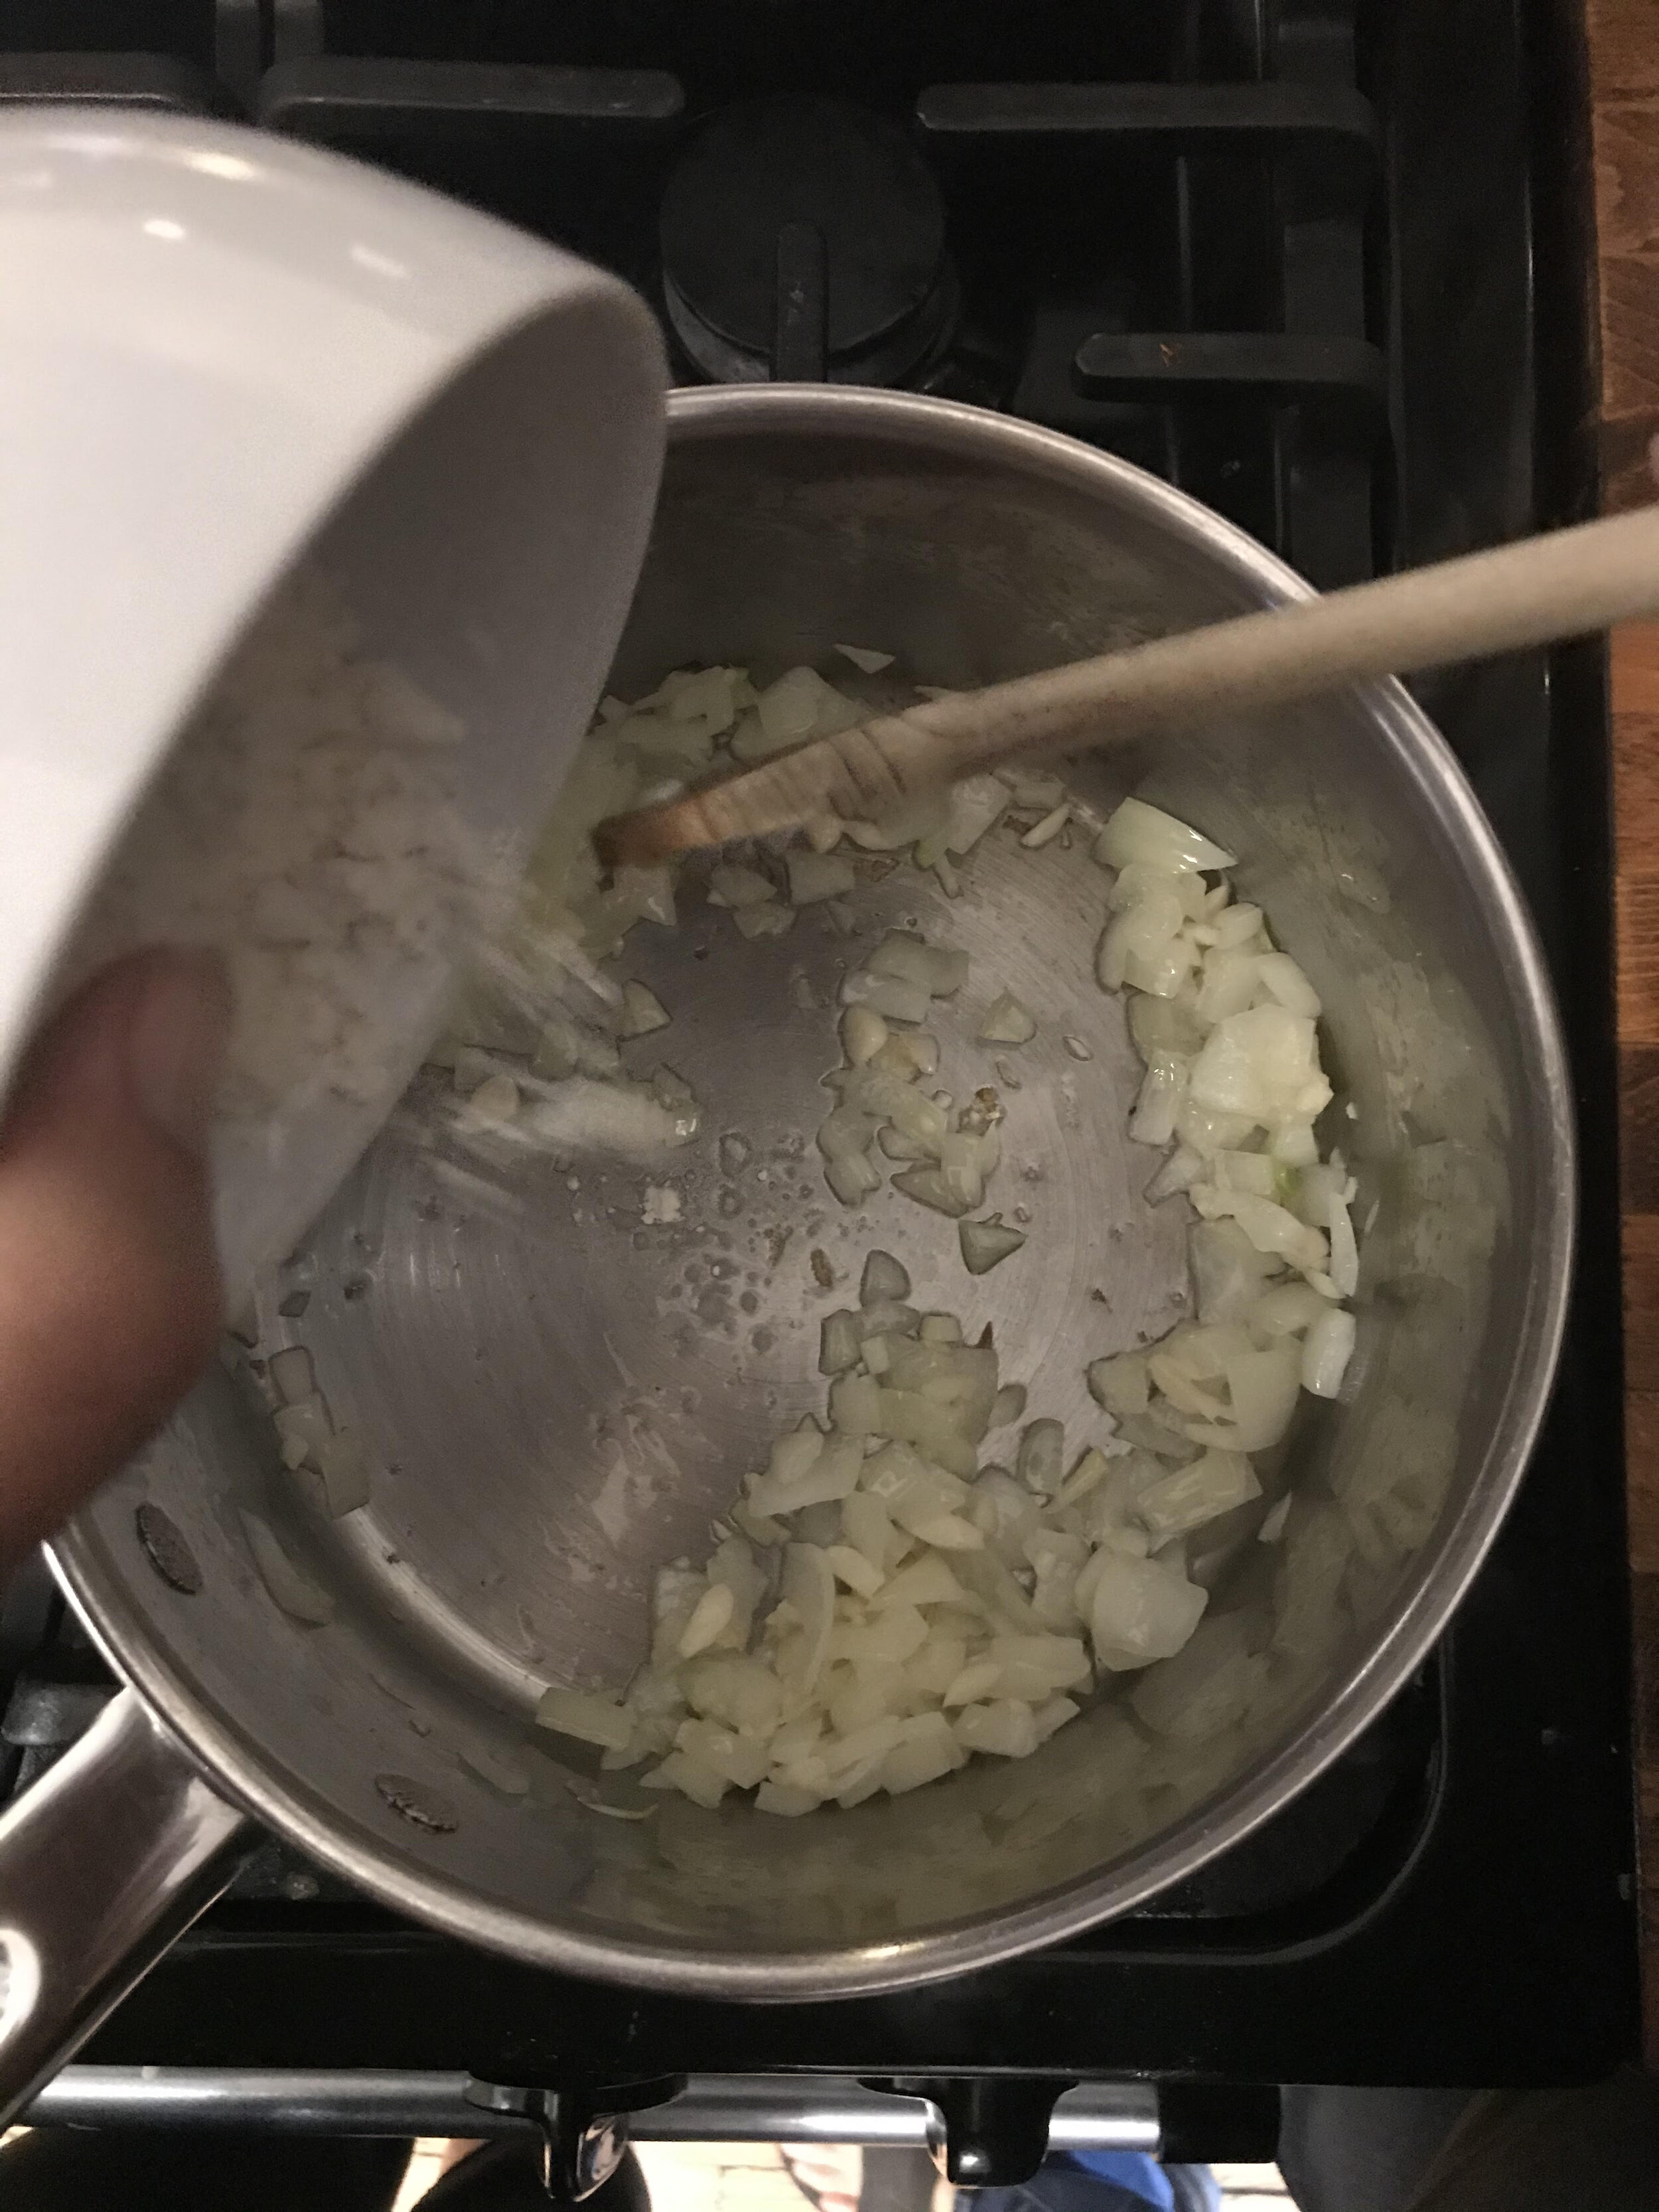 Add the flour to the onions and garlic.